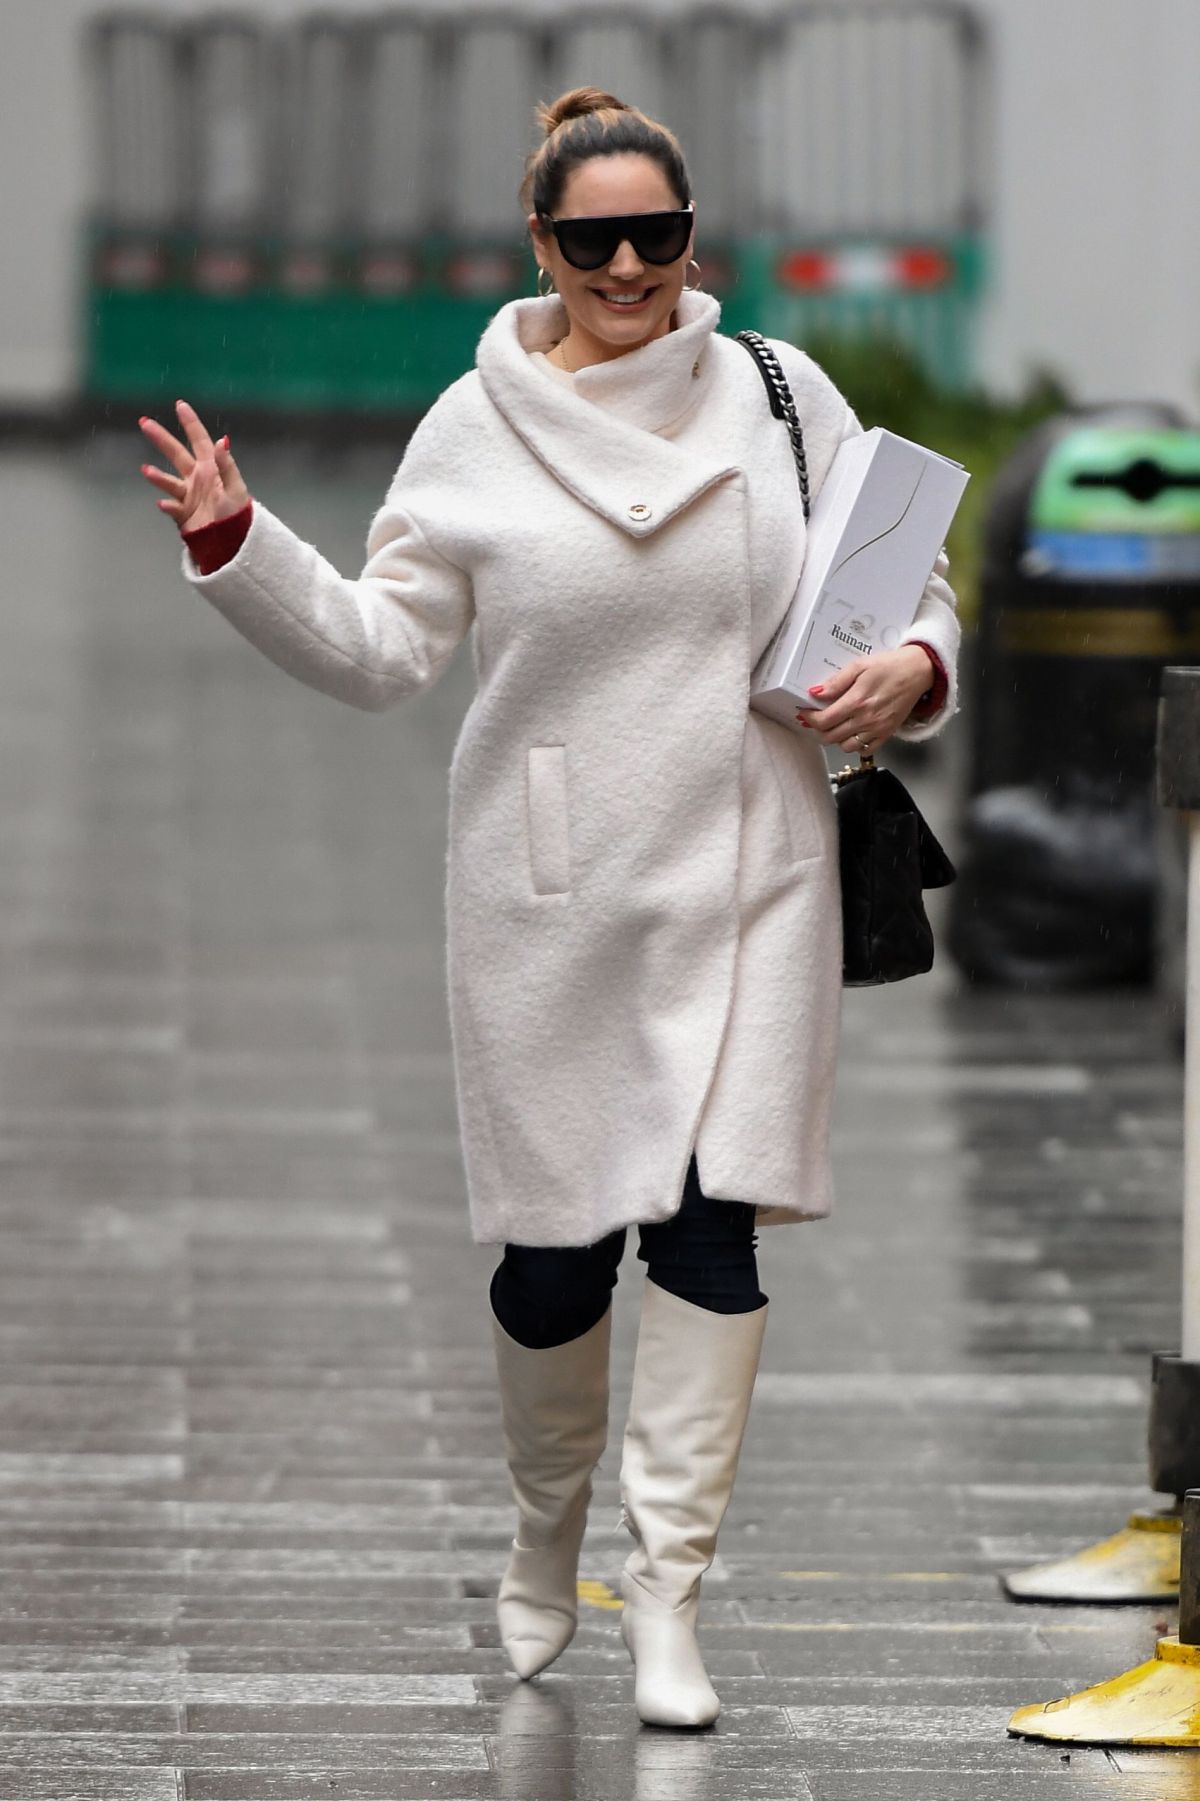 179310288_kelly-brook-in-a-white-coat-and-boots-at-global-radio-in-london-12-23-2020-4.jpg